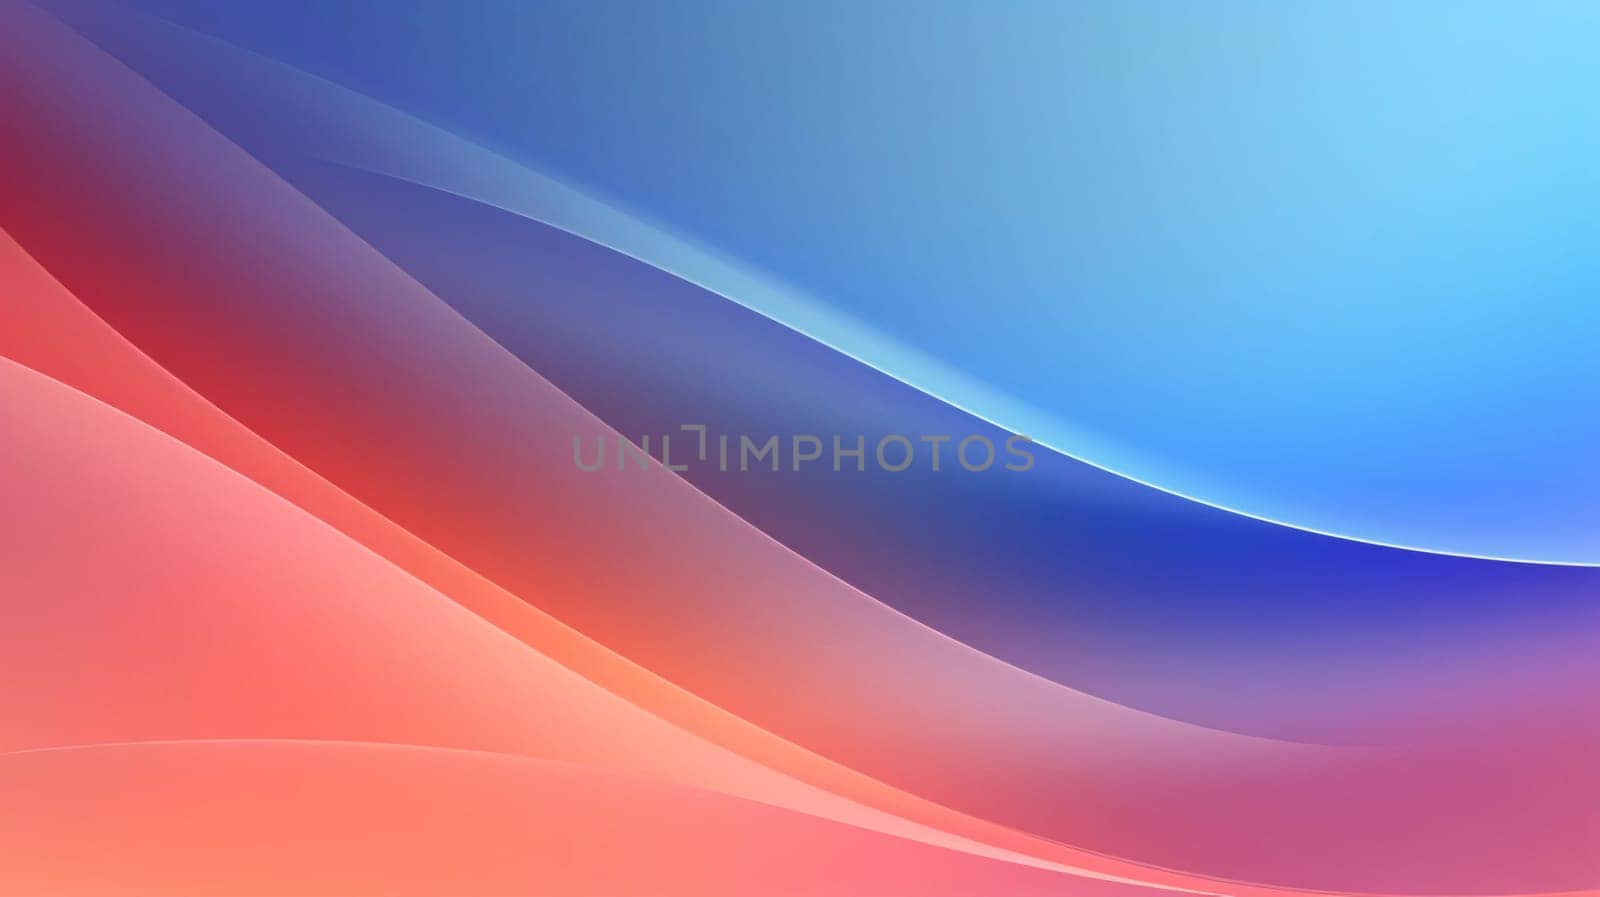 Abstract background design: abstract background with smooth lines in blue, orange and purple colors